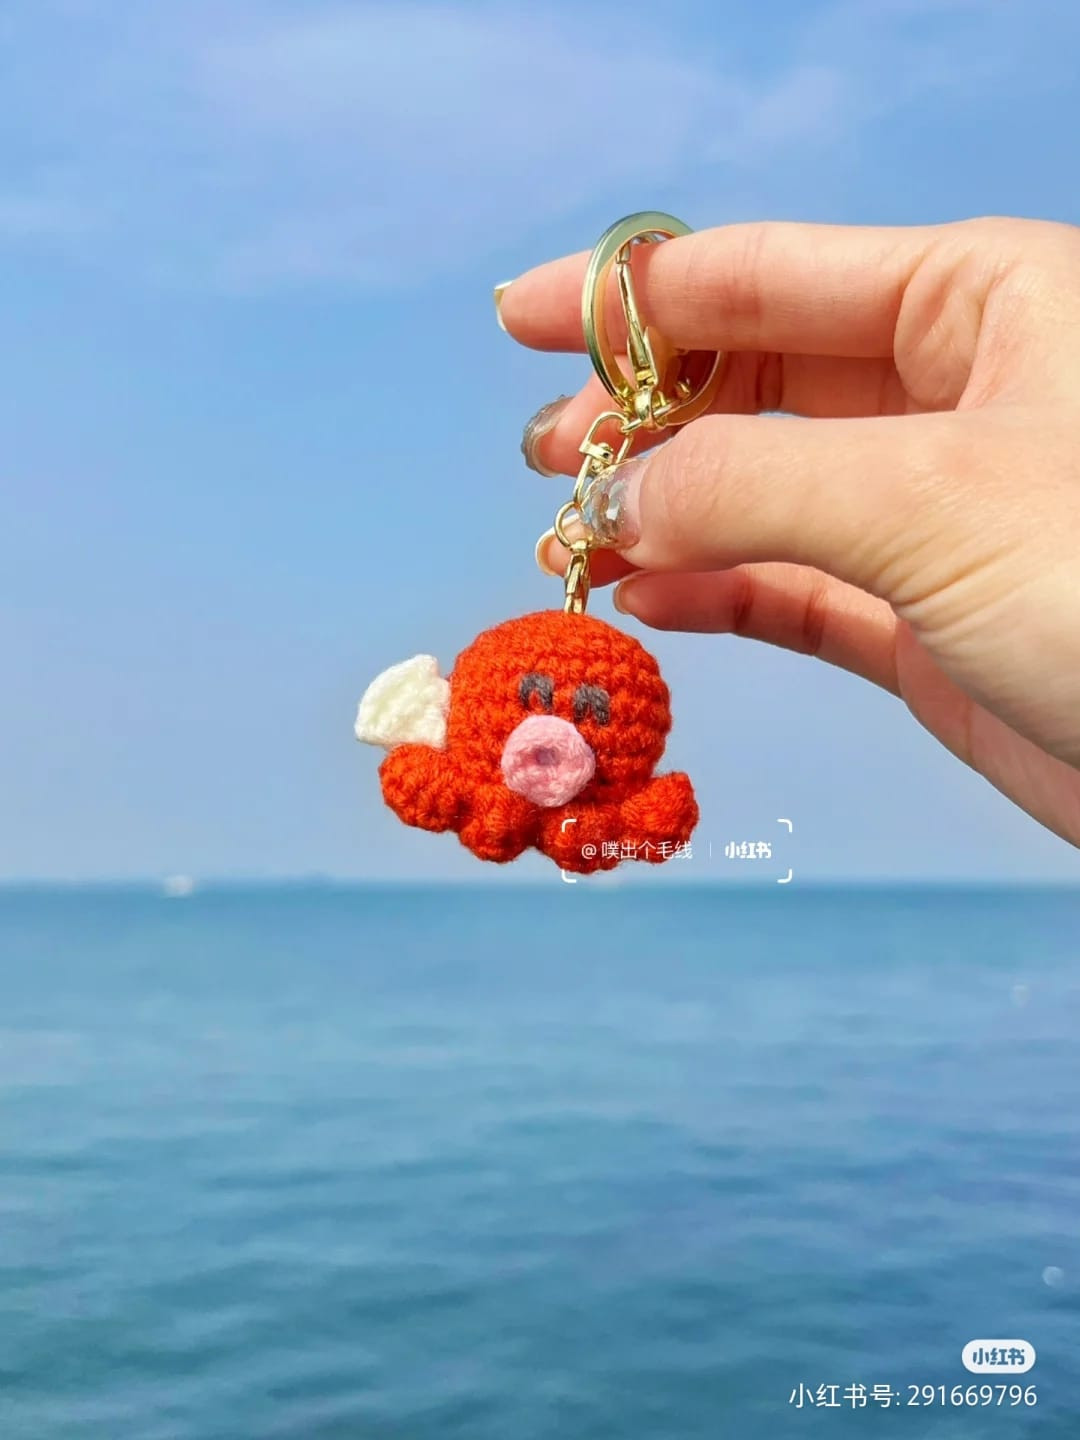 Fish and octopus keychain pattern